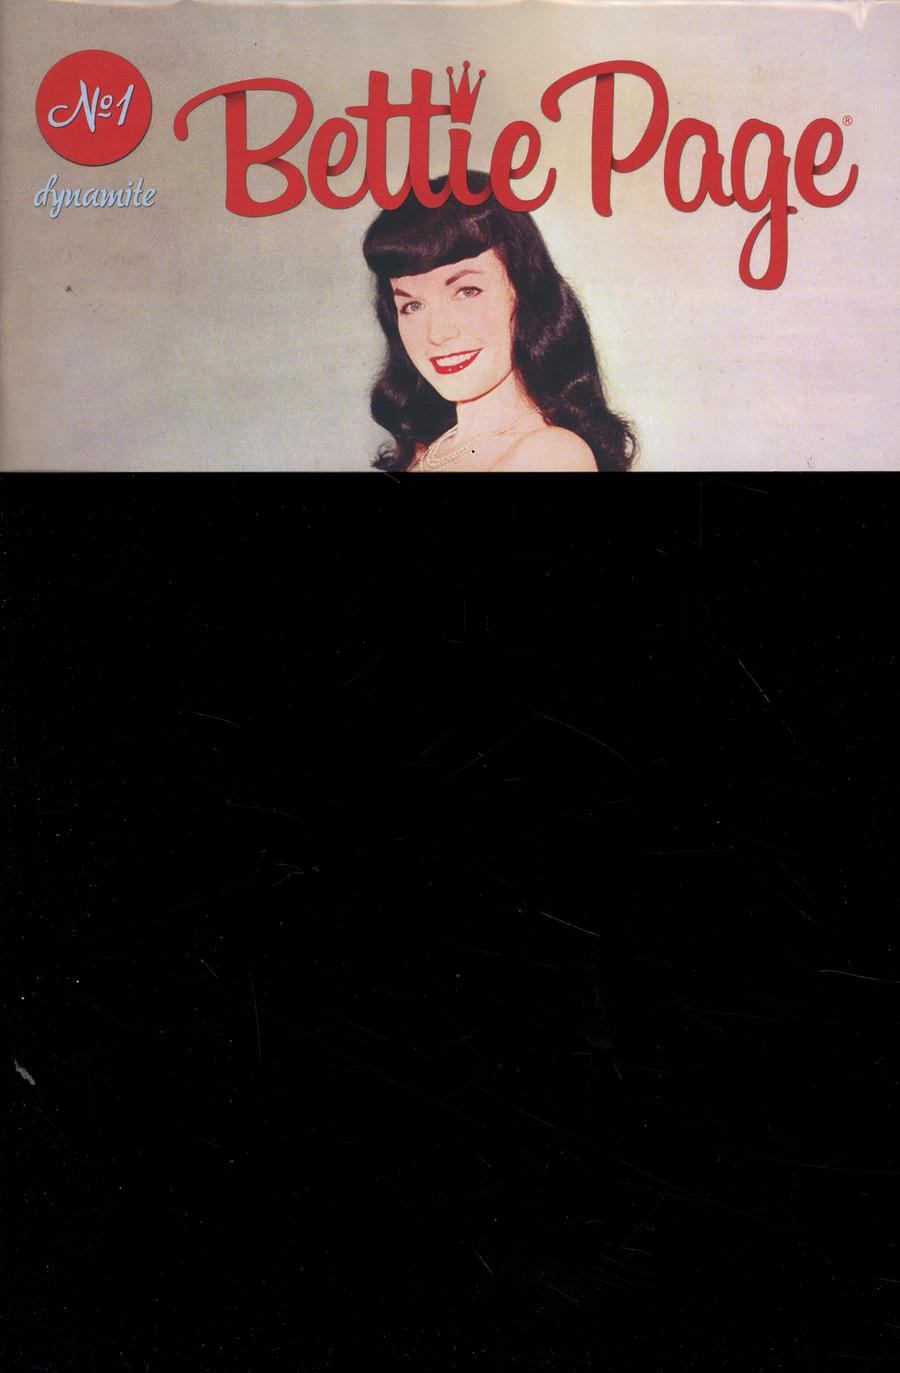 Bettie Page Vol 2 #1 Cover N Variant Black Bag Photo Cover Without Polybag